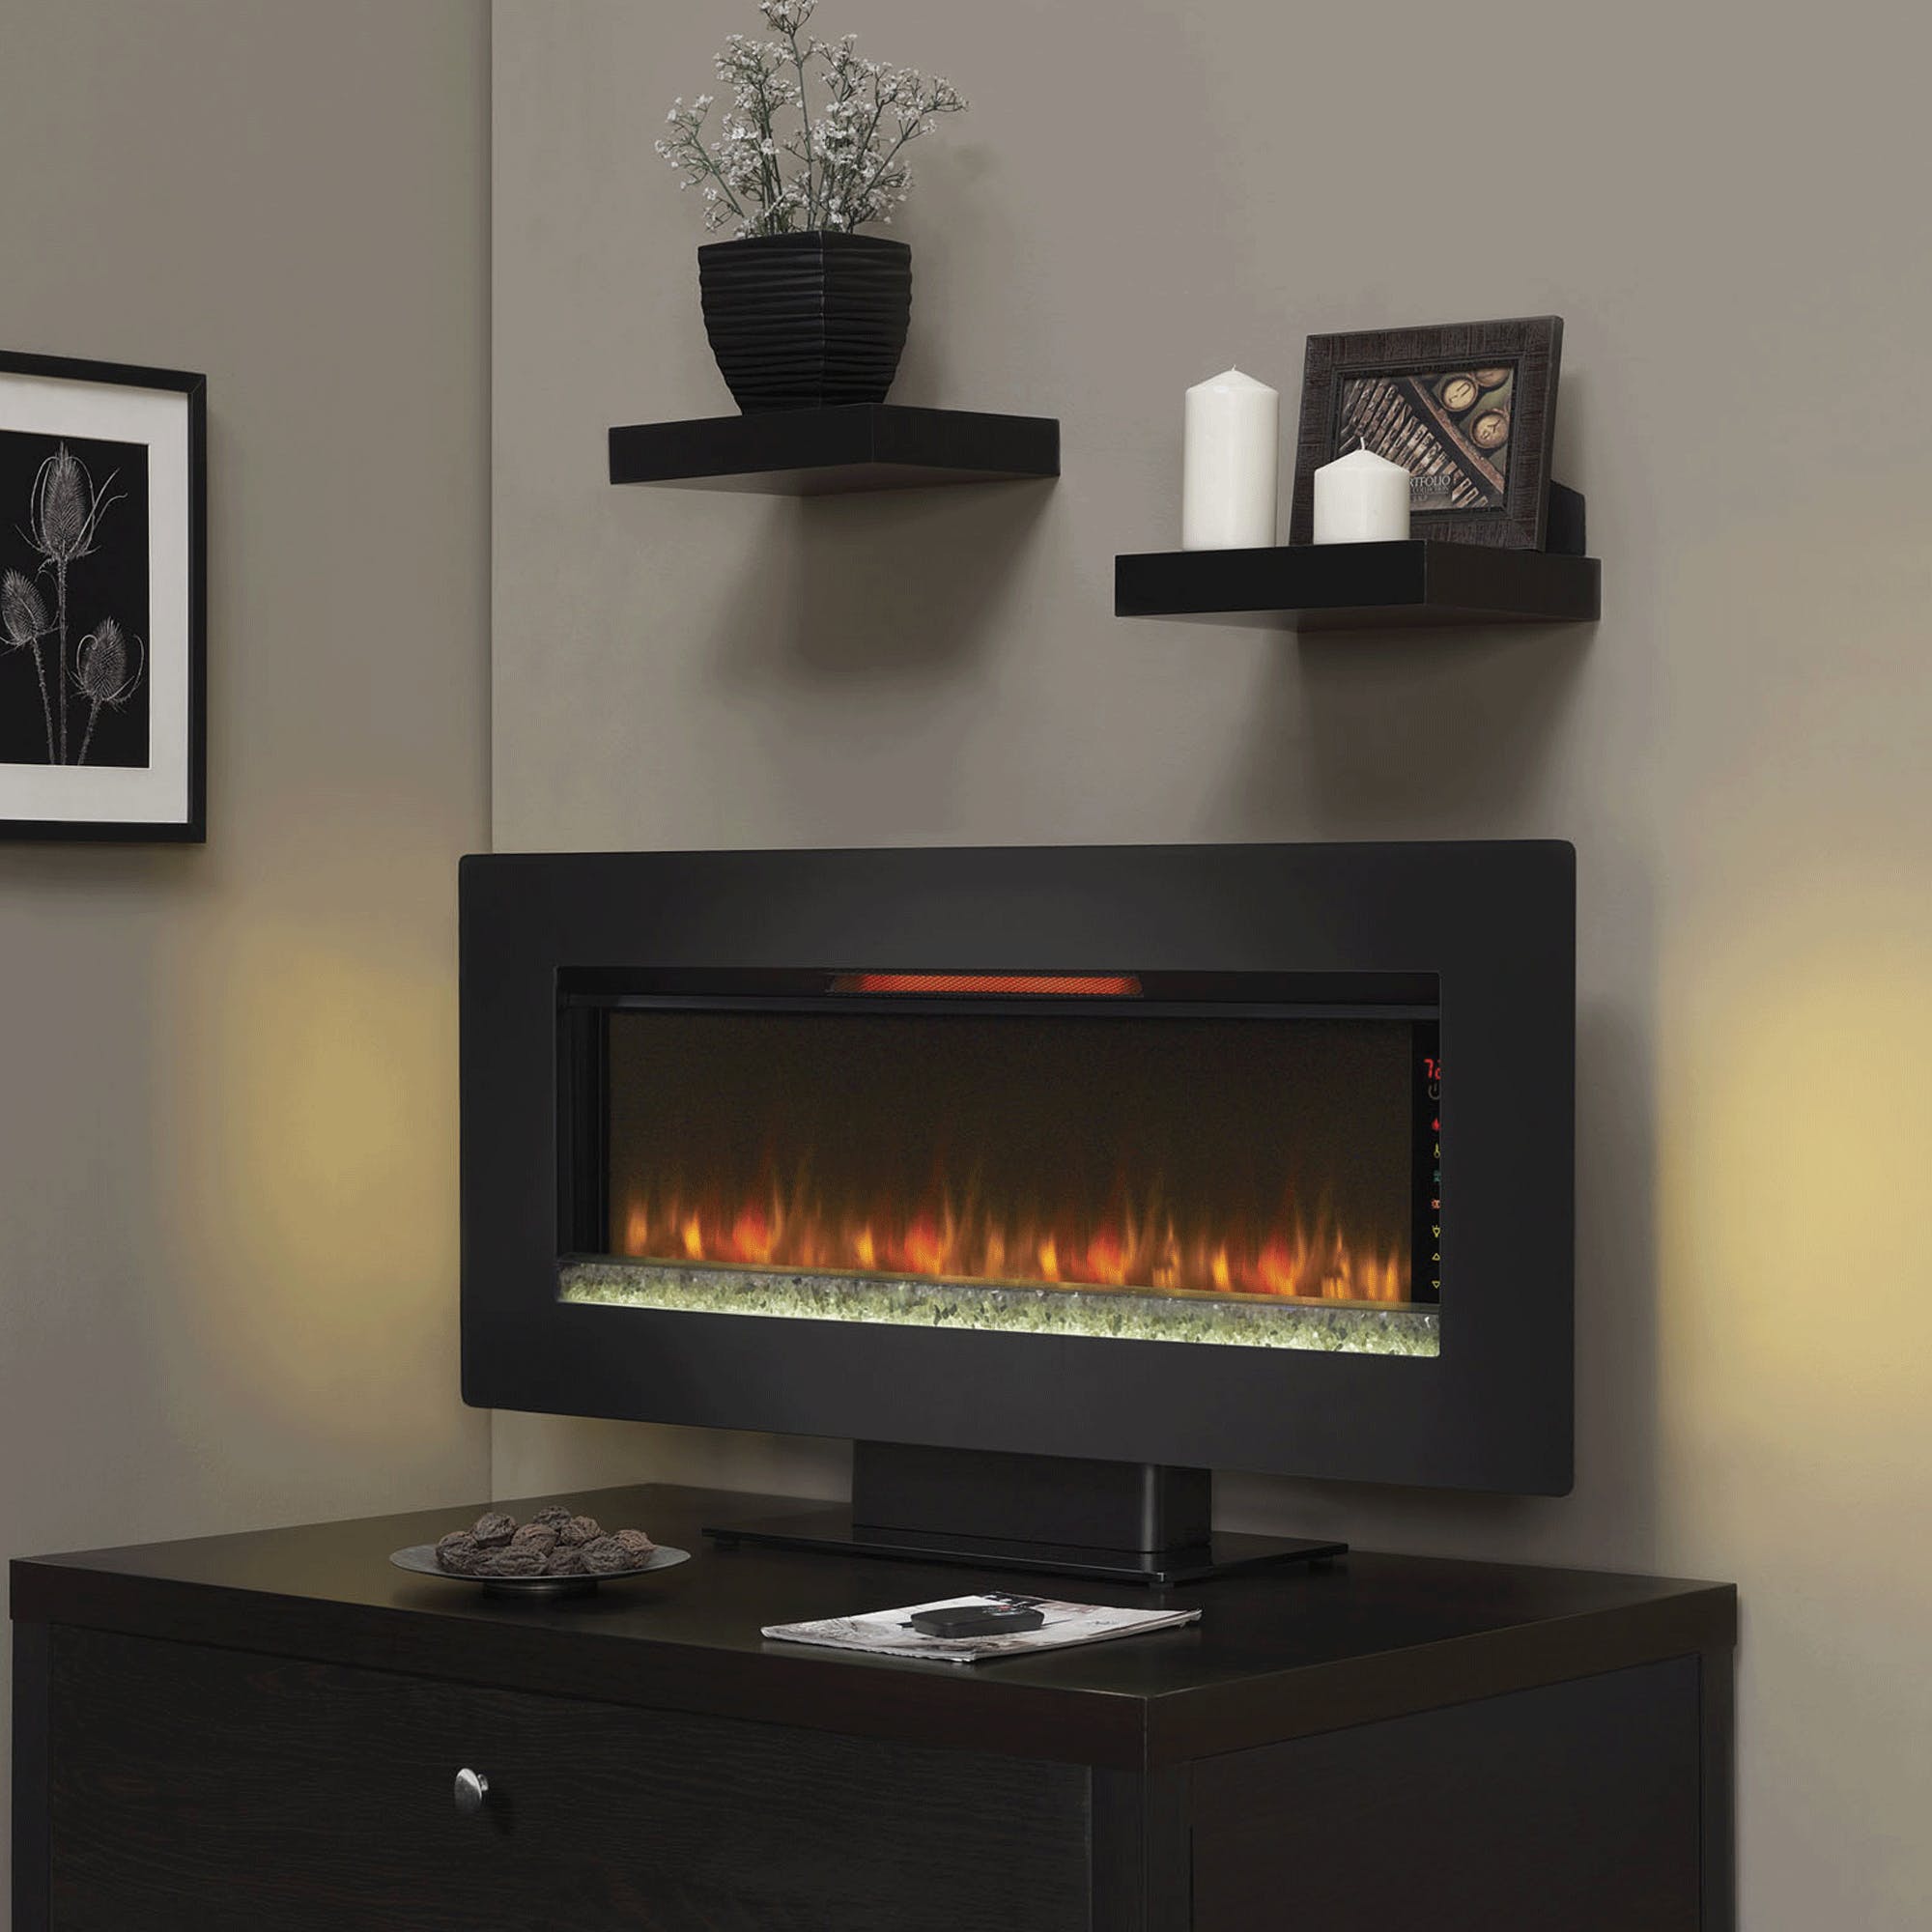 Tv Fireplace Wall Unit Designs Lovely Felicity 47" Wall Mounted Infrared Quartz Fireplace Black